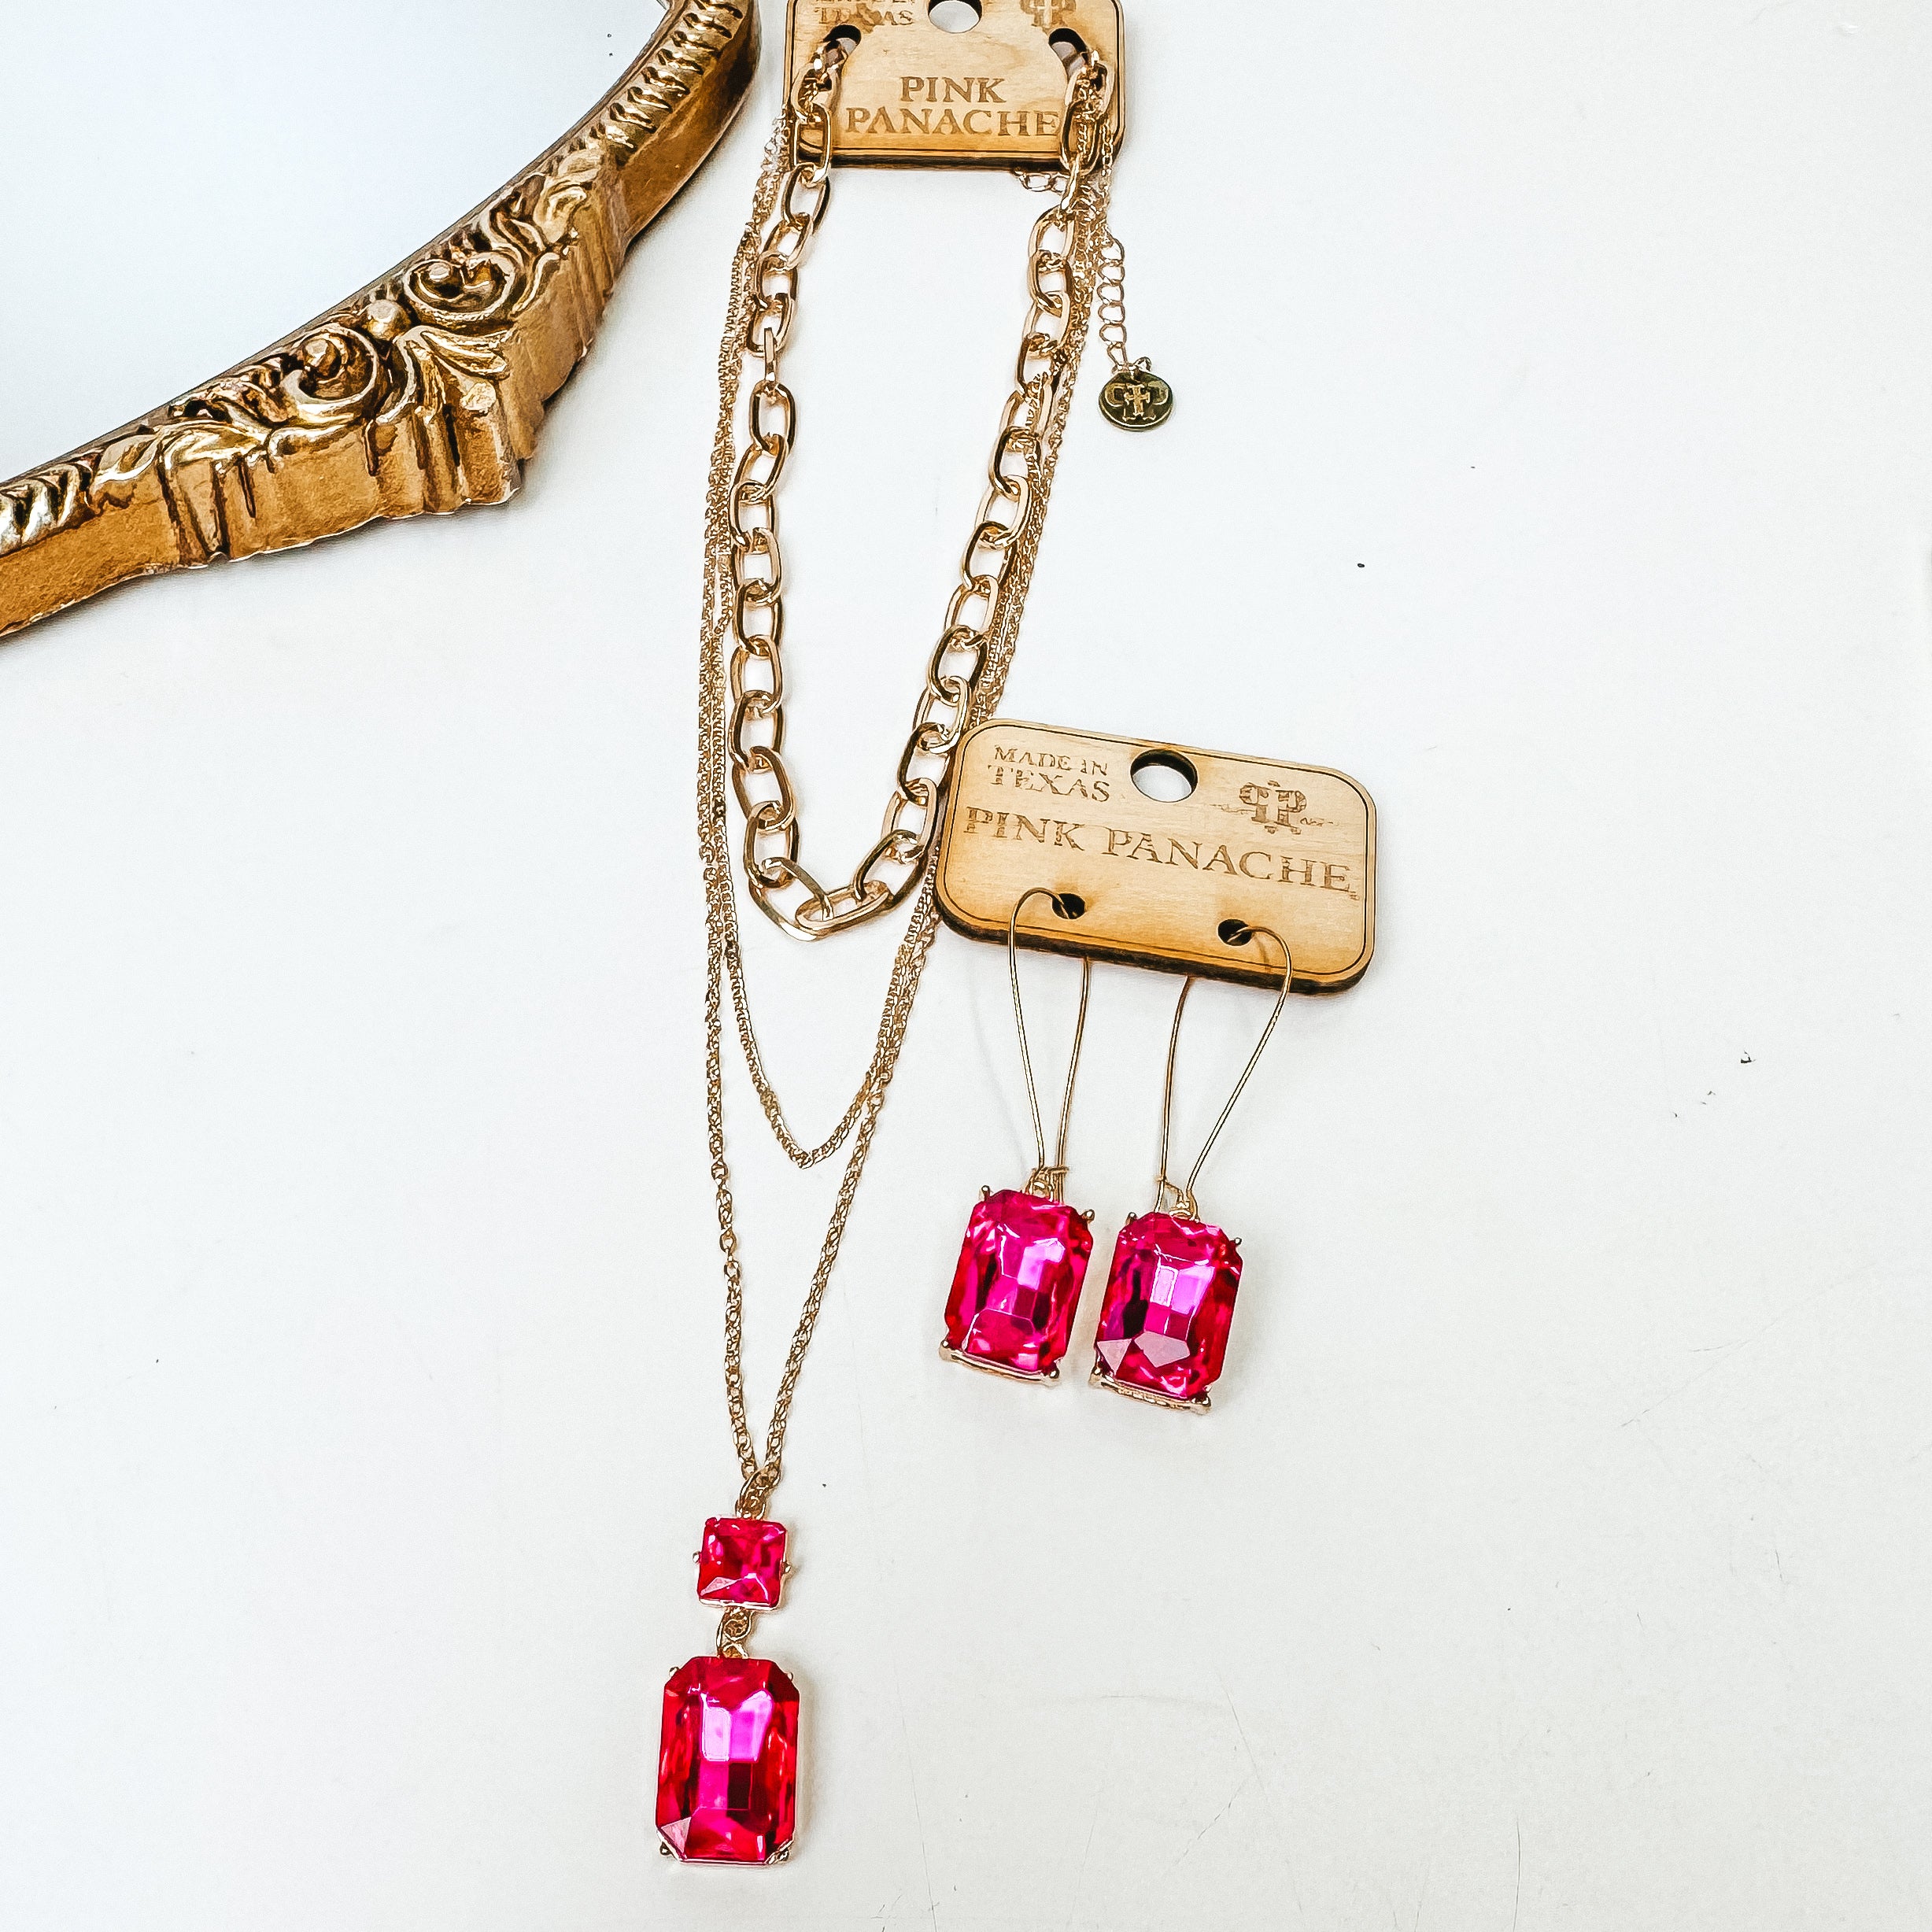 Pink Panache | 3 Strand Gold Tone Chain Necklace with Fuchsia Pink Square and Rectangle Pendant - Giddy Up Glamour Boutique